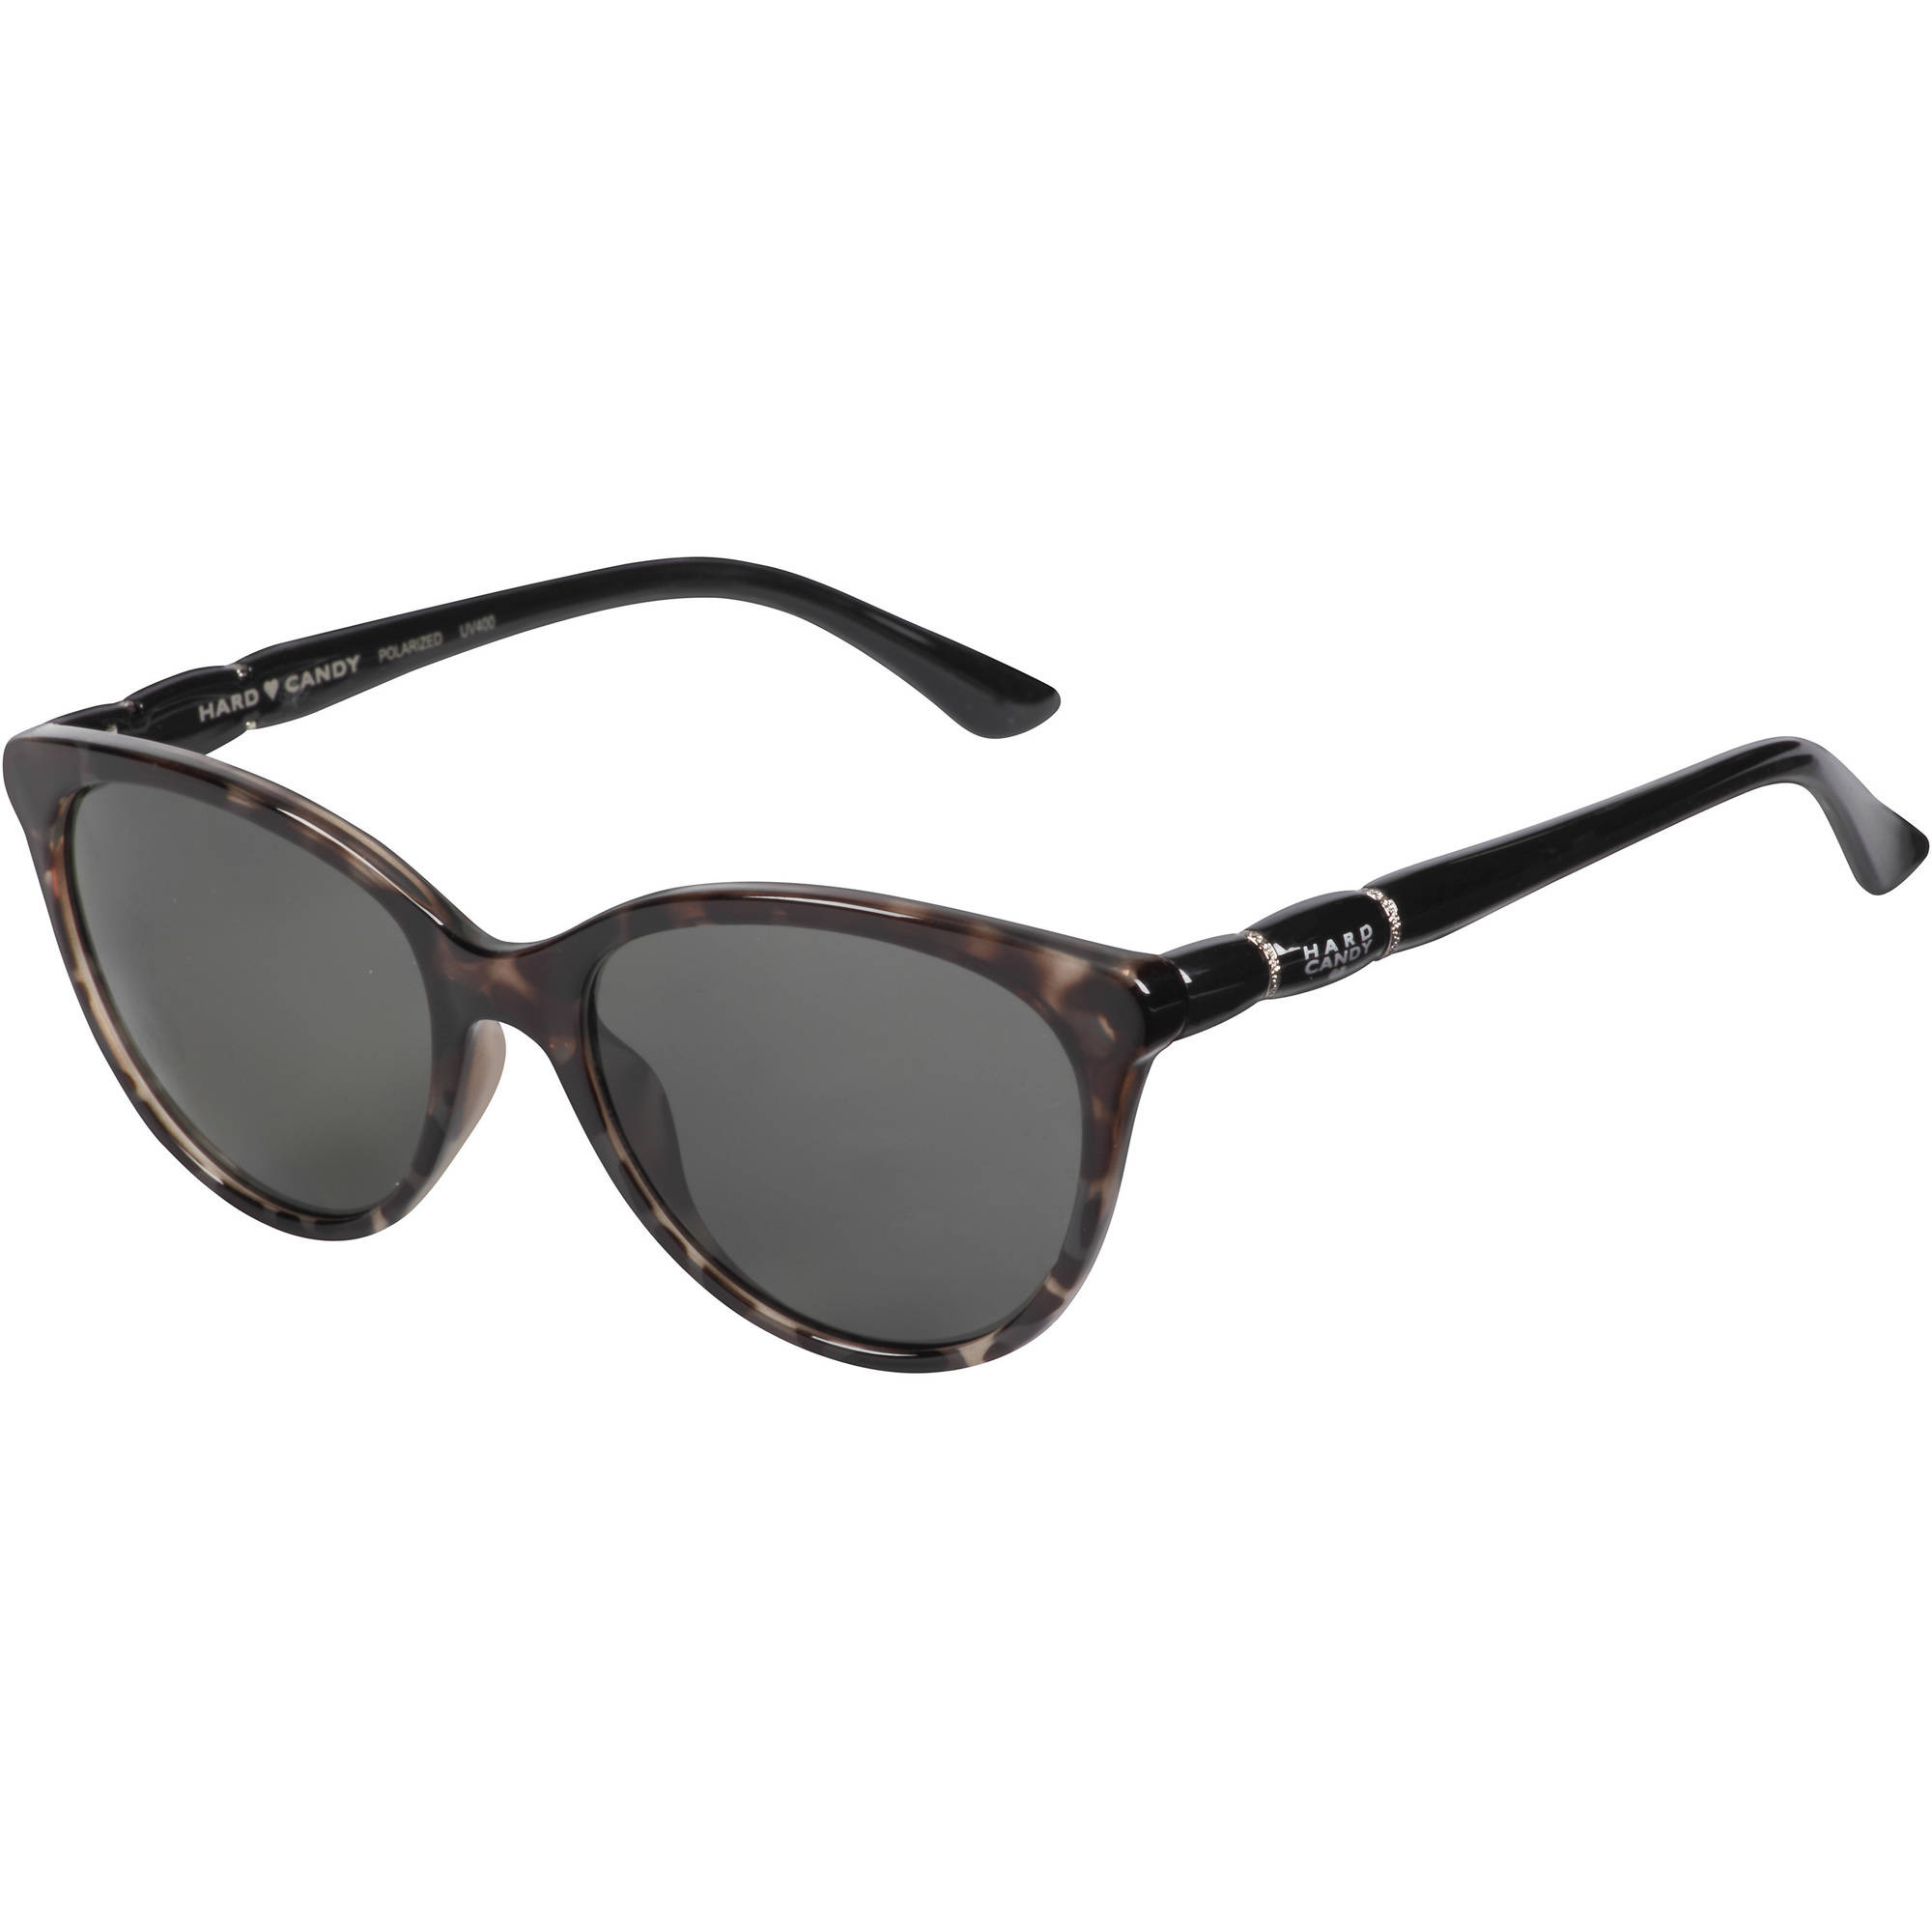 Hard Candy Womens Rx'able Sunglasses, Hs13, Black Tortoise Patterned, 55-18-142, with Case - image 1 of 13